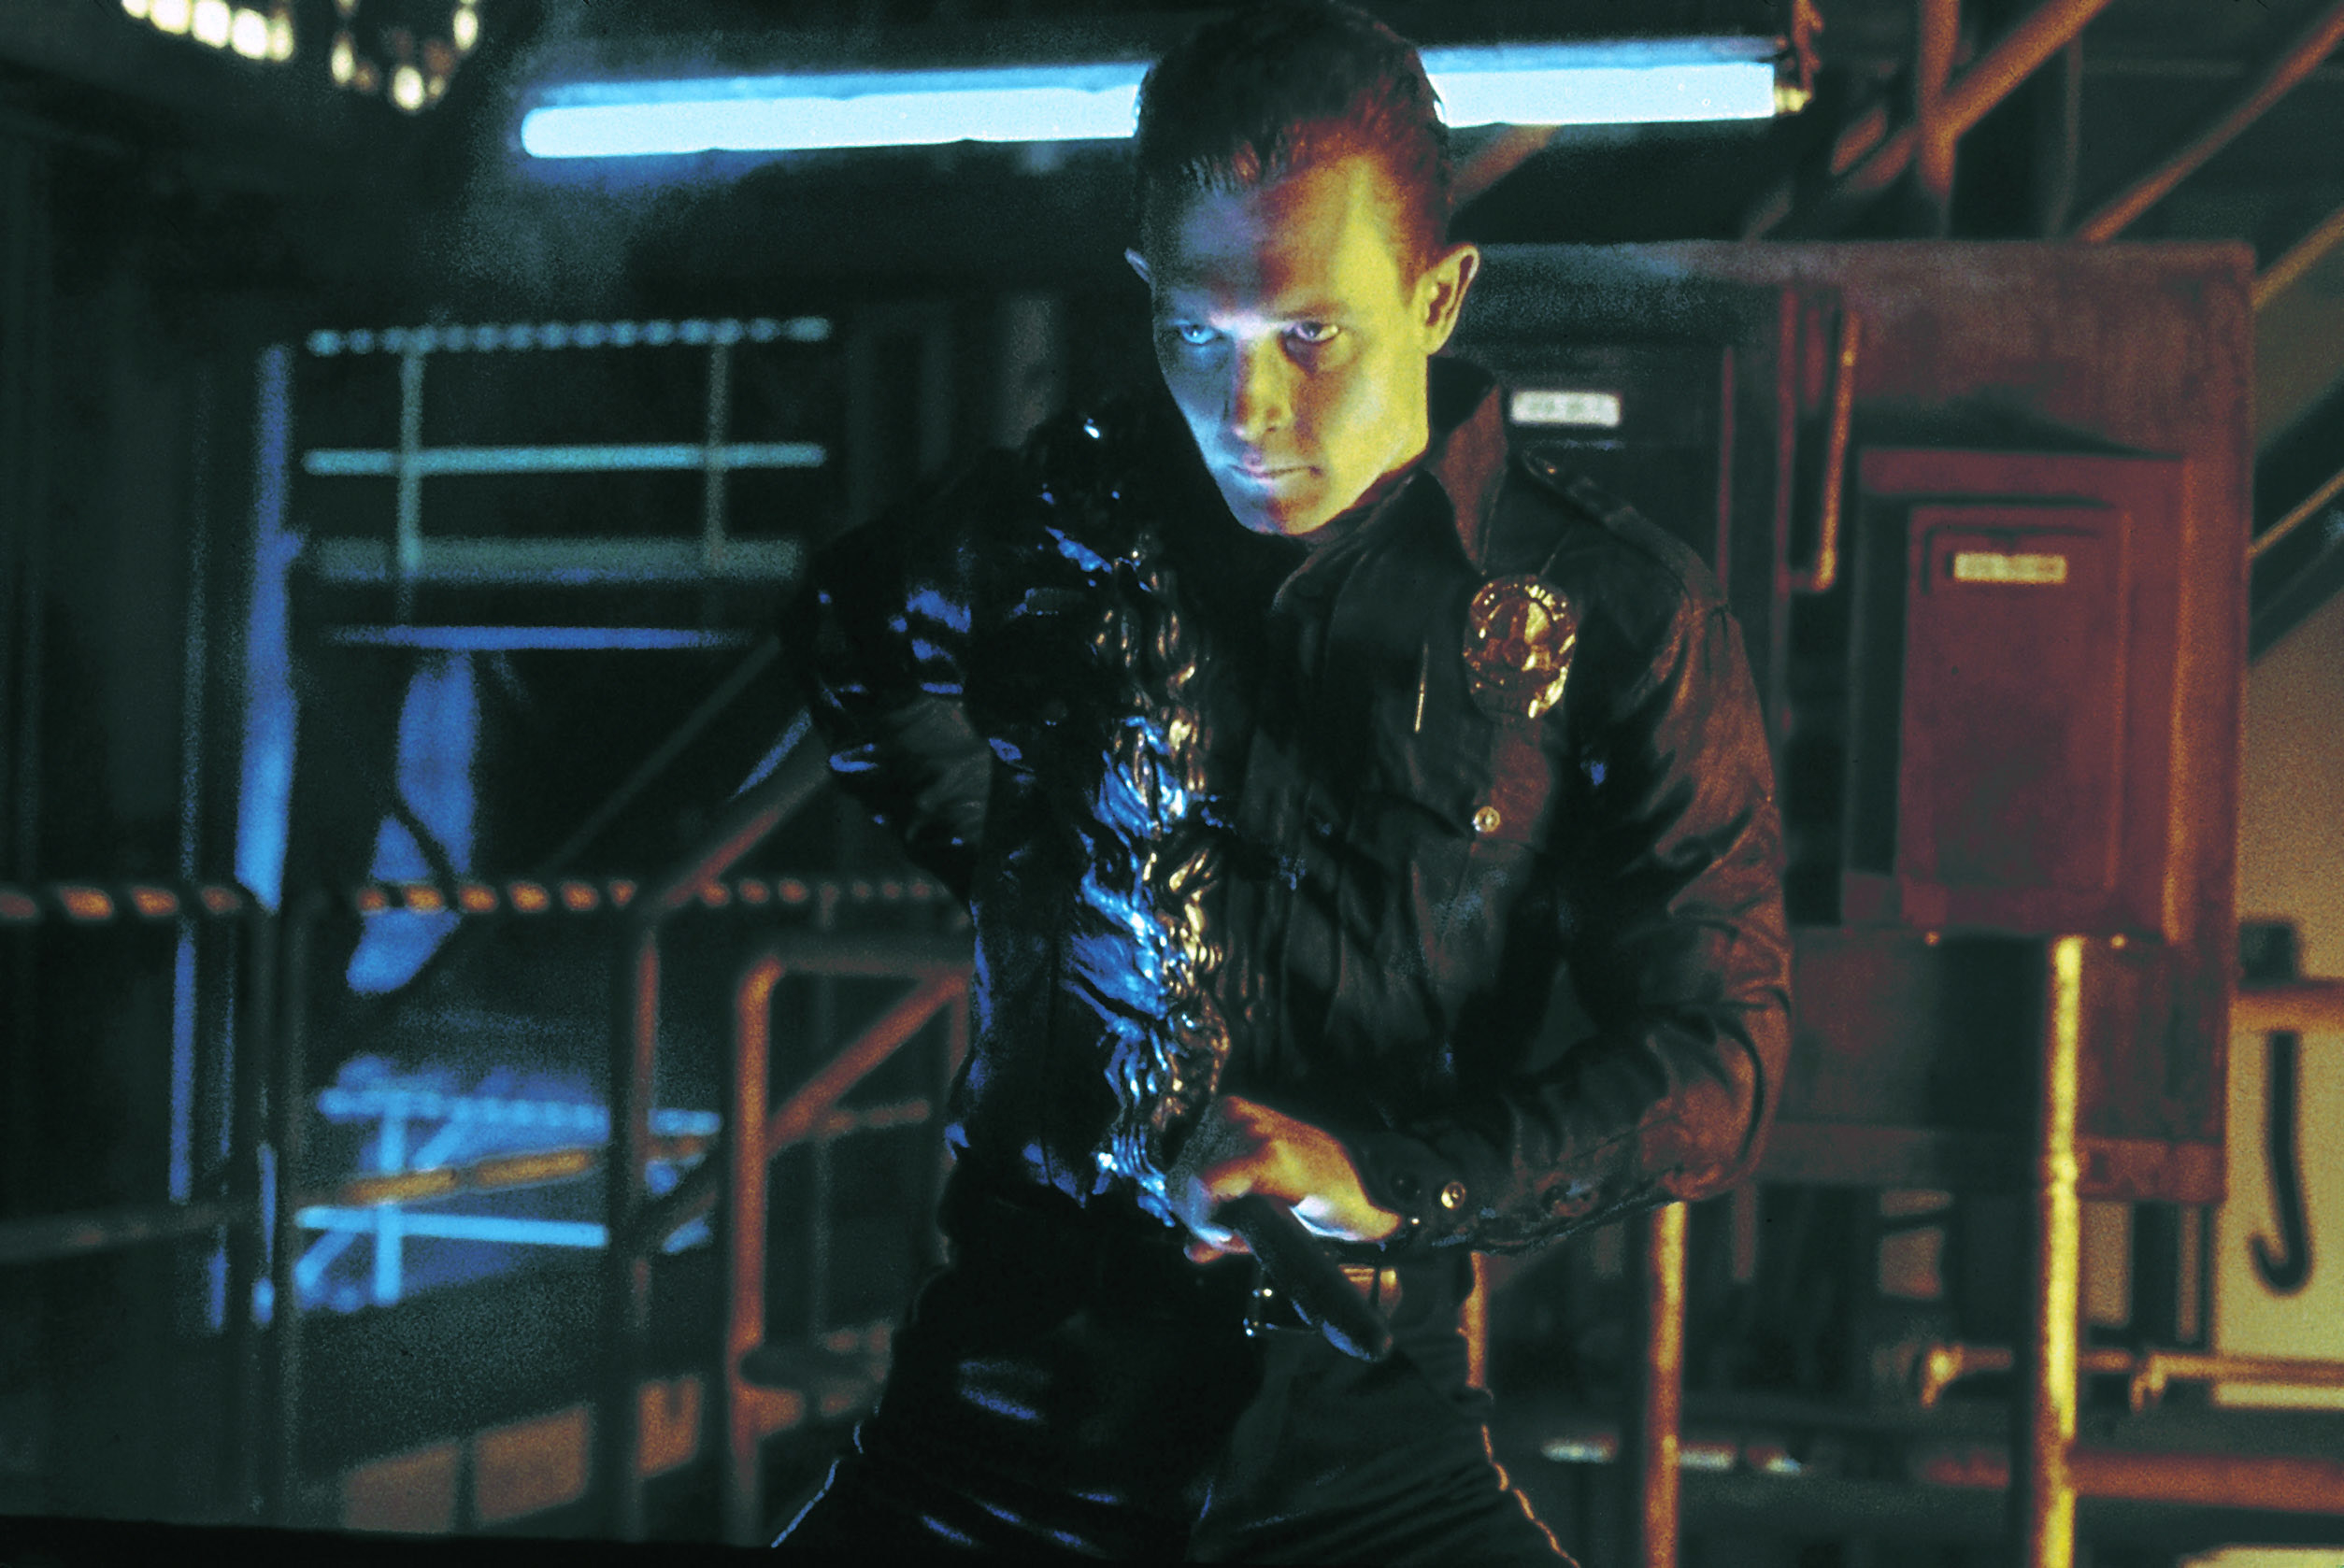 The T-1000 half melted